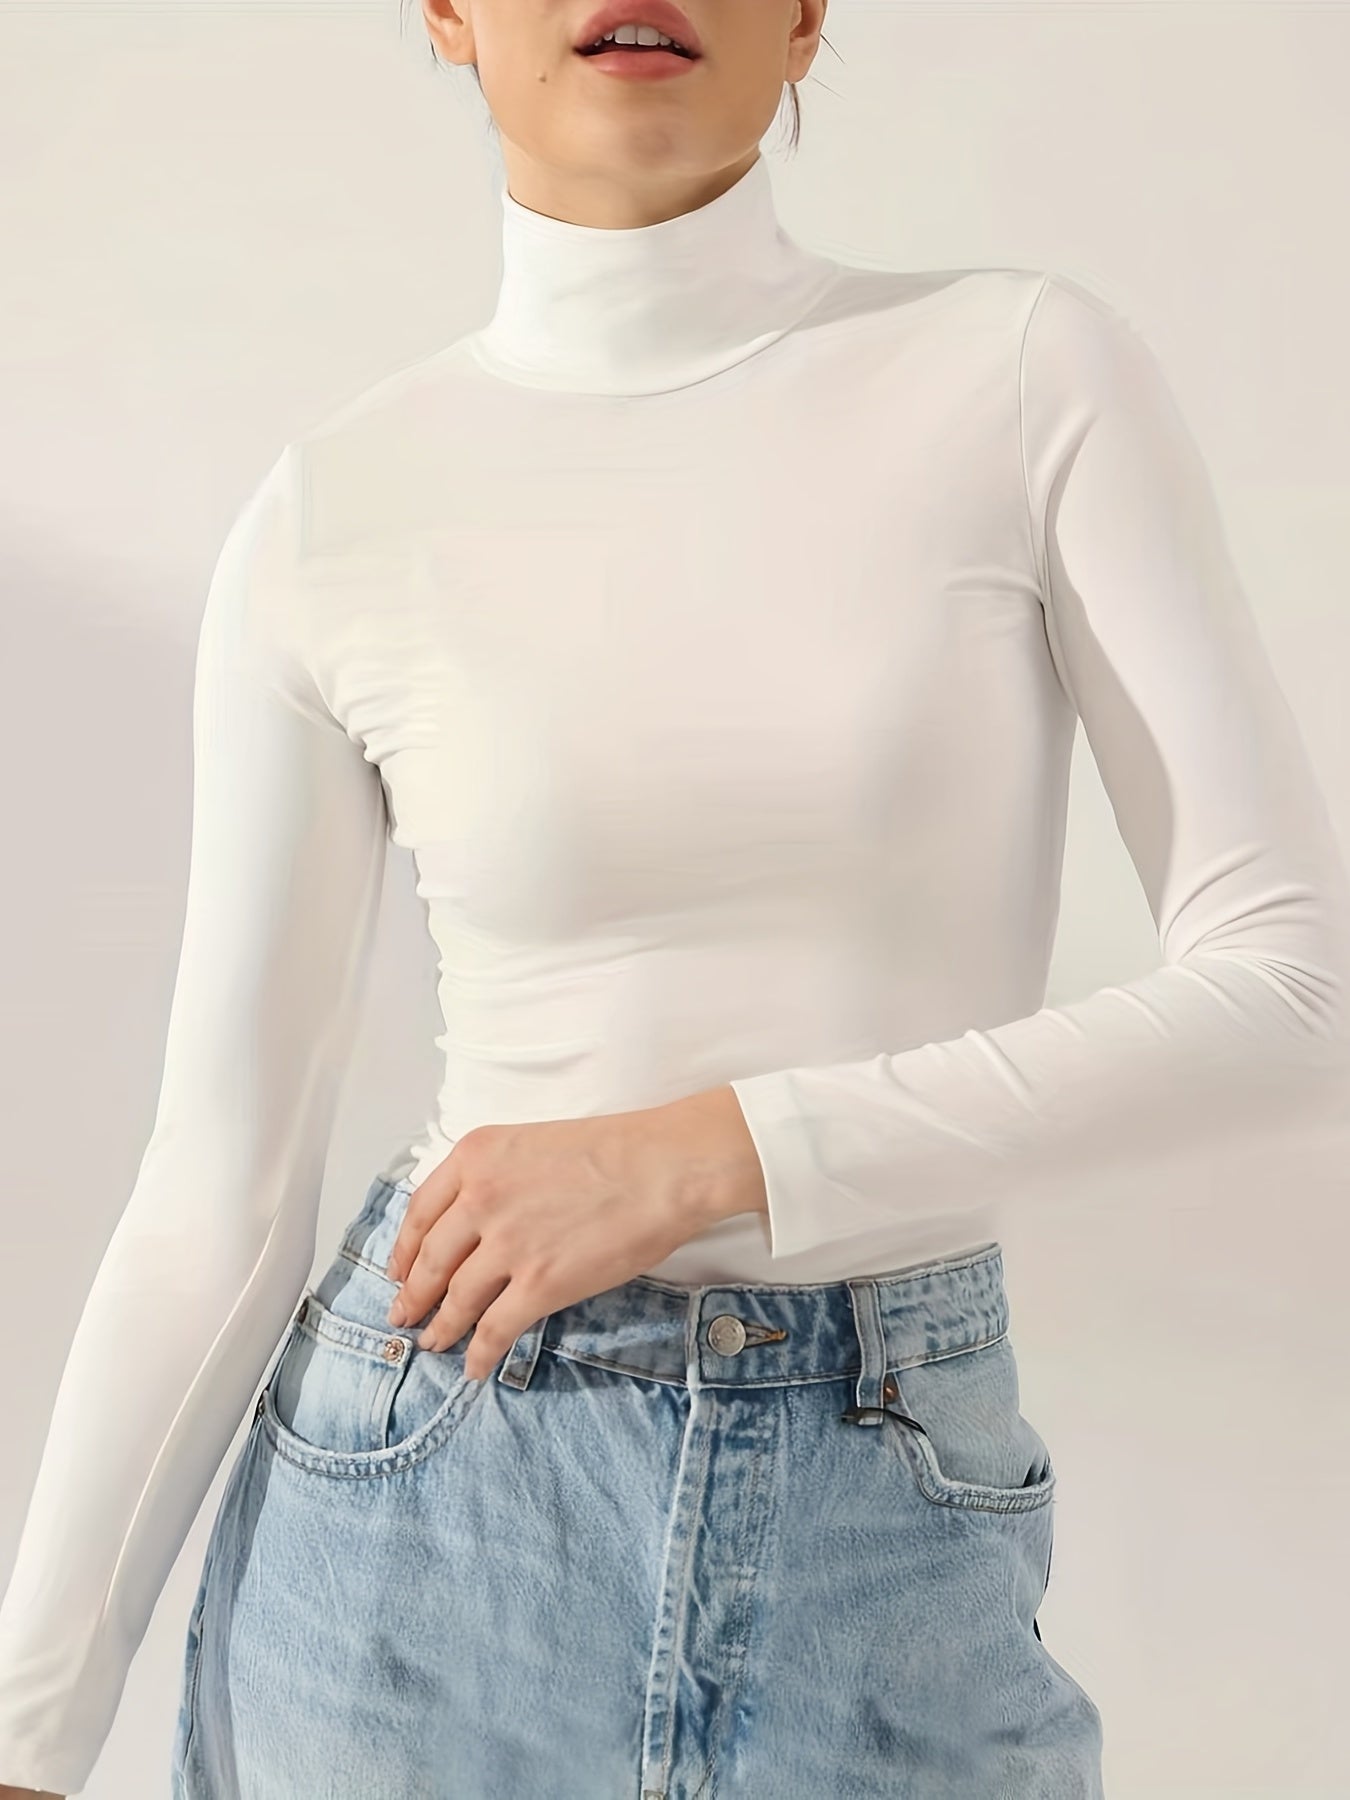 vlovelaw  Long Sleeve Turtleneck Slim T-shirt, Casual Solid Color T-shirt For Spring & Fall, Women's Clothing